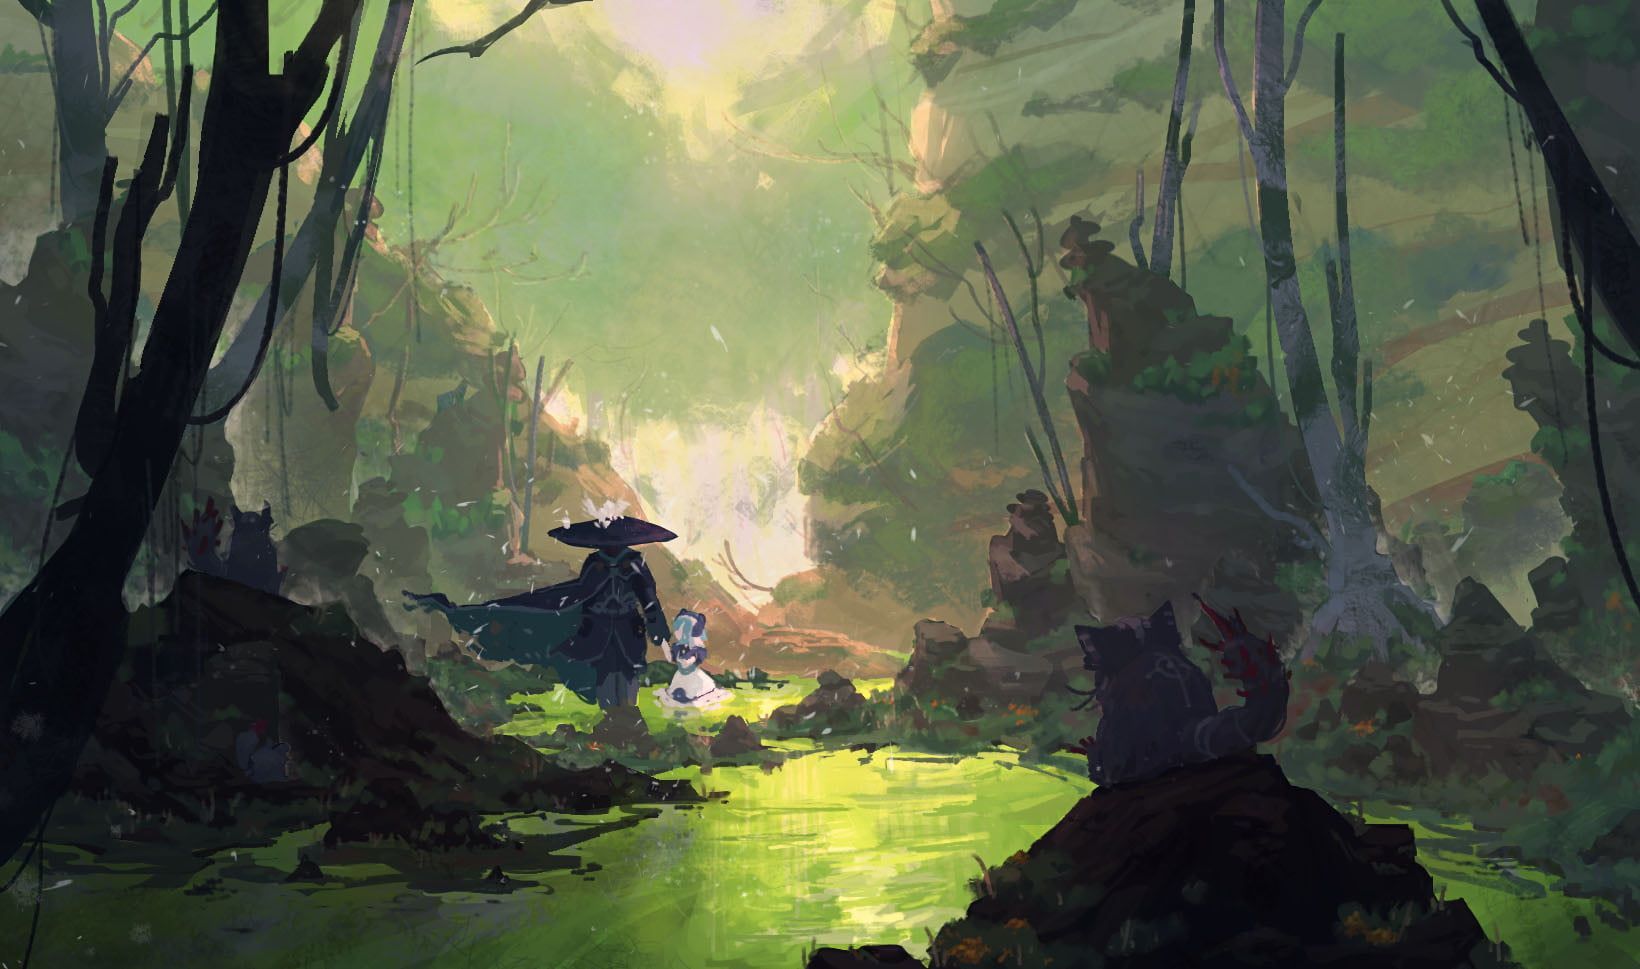 Made in Abyss Ozen (Made in Abyss) Marulk (Made in Abyss) P #wallpaper #hdwallpaper #desktop. Abyss anime, Anime wallpaper, Anime